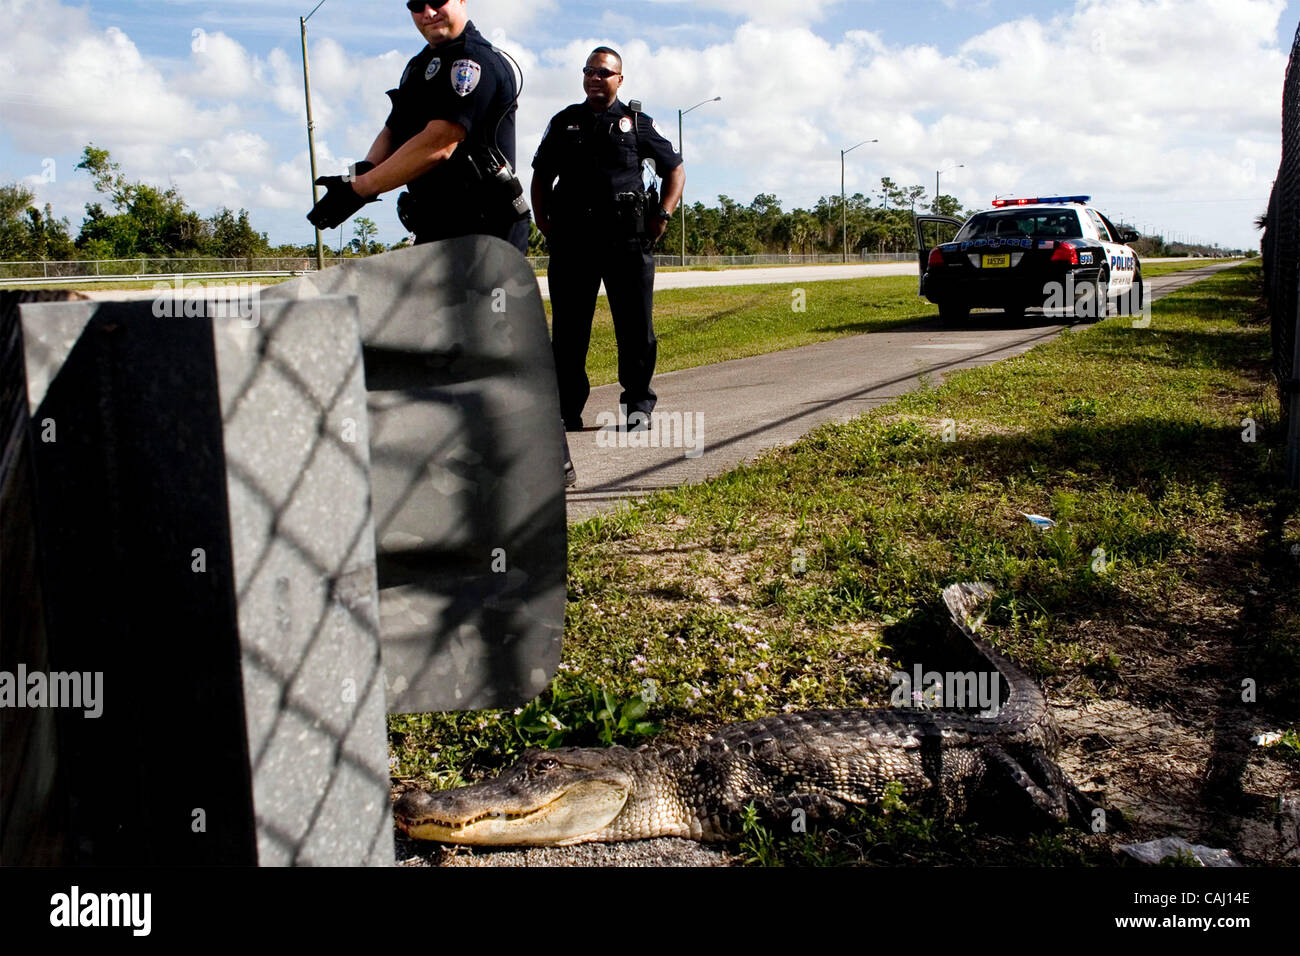 123007 met clo alig - 0047121A - staff photo by Carl Kiilsgaard/The Palm Beach Post -- West Palm Beach --  West Palm Beach police officers, Rade Momirovich (cq, left) and William Dames (cq, right) prepare to inspect an alligator found run over by a car on Northlake Rd. Dames is a 10 year veteran of  Stock Photo